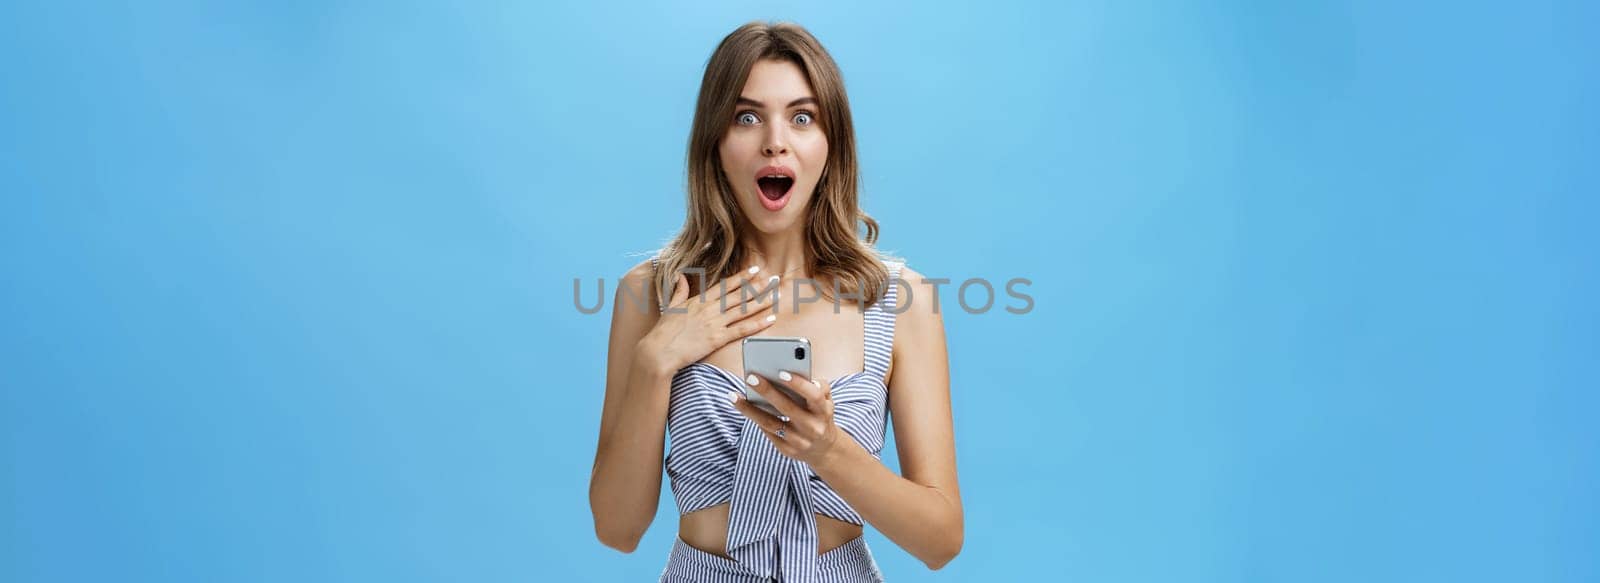 Woman feeling surprised and grateful after reading unexpected news from smartphone pressing palm to chest from amazement dropping jaw and smiling staring at camera, cannot believe it happened. Technology concept